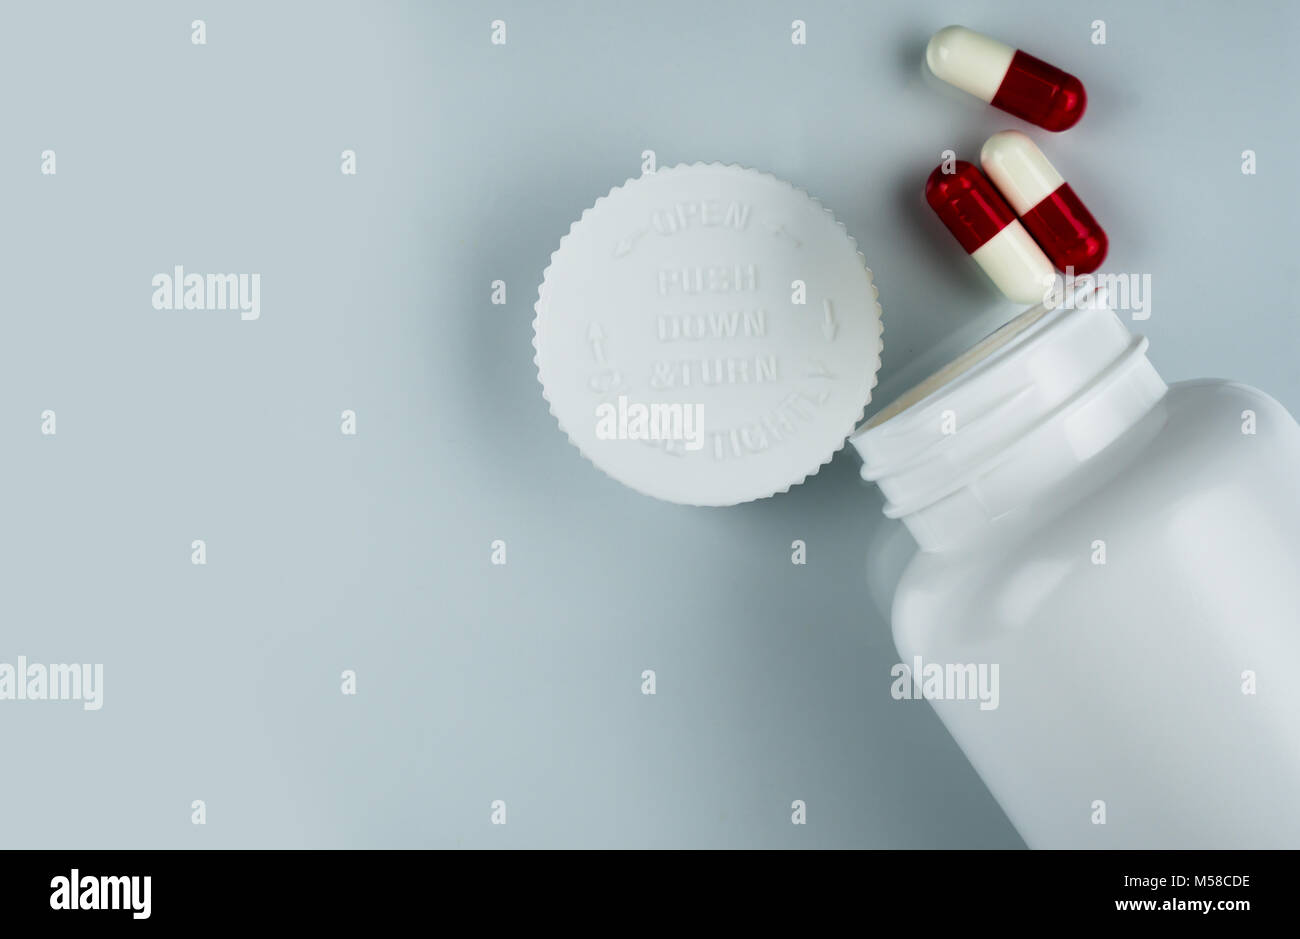 Medication Pharmacy Child Proof Container Stock Photo - Image of  medication, container: 112943206